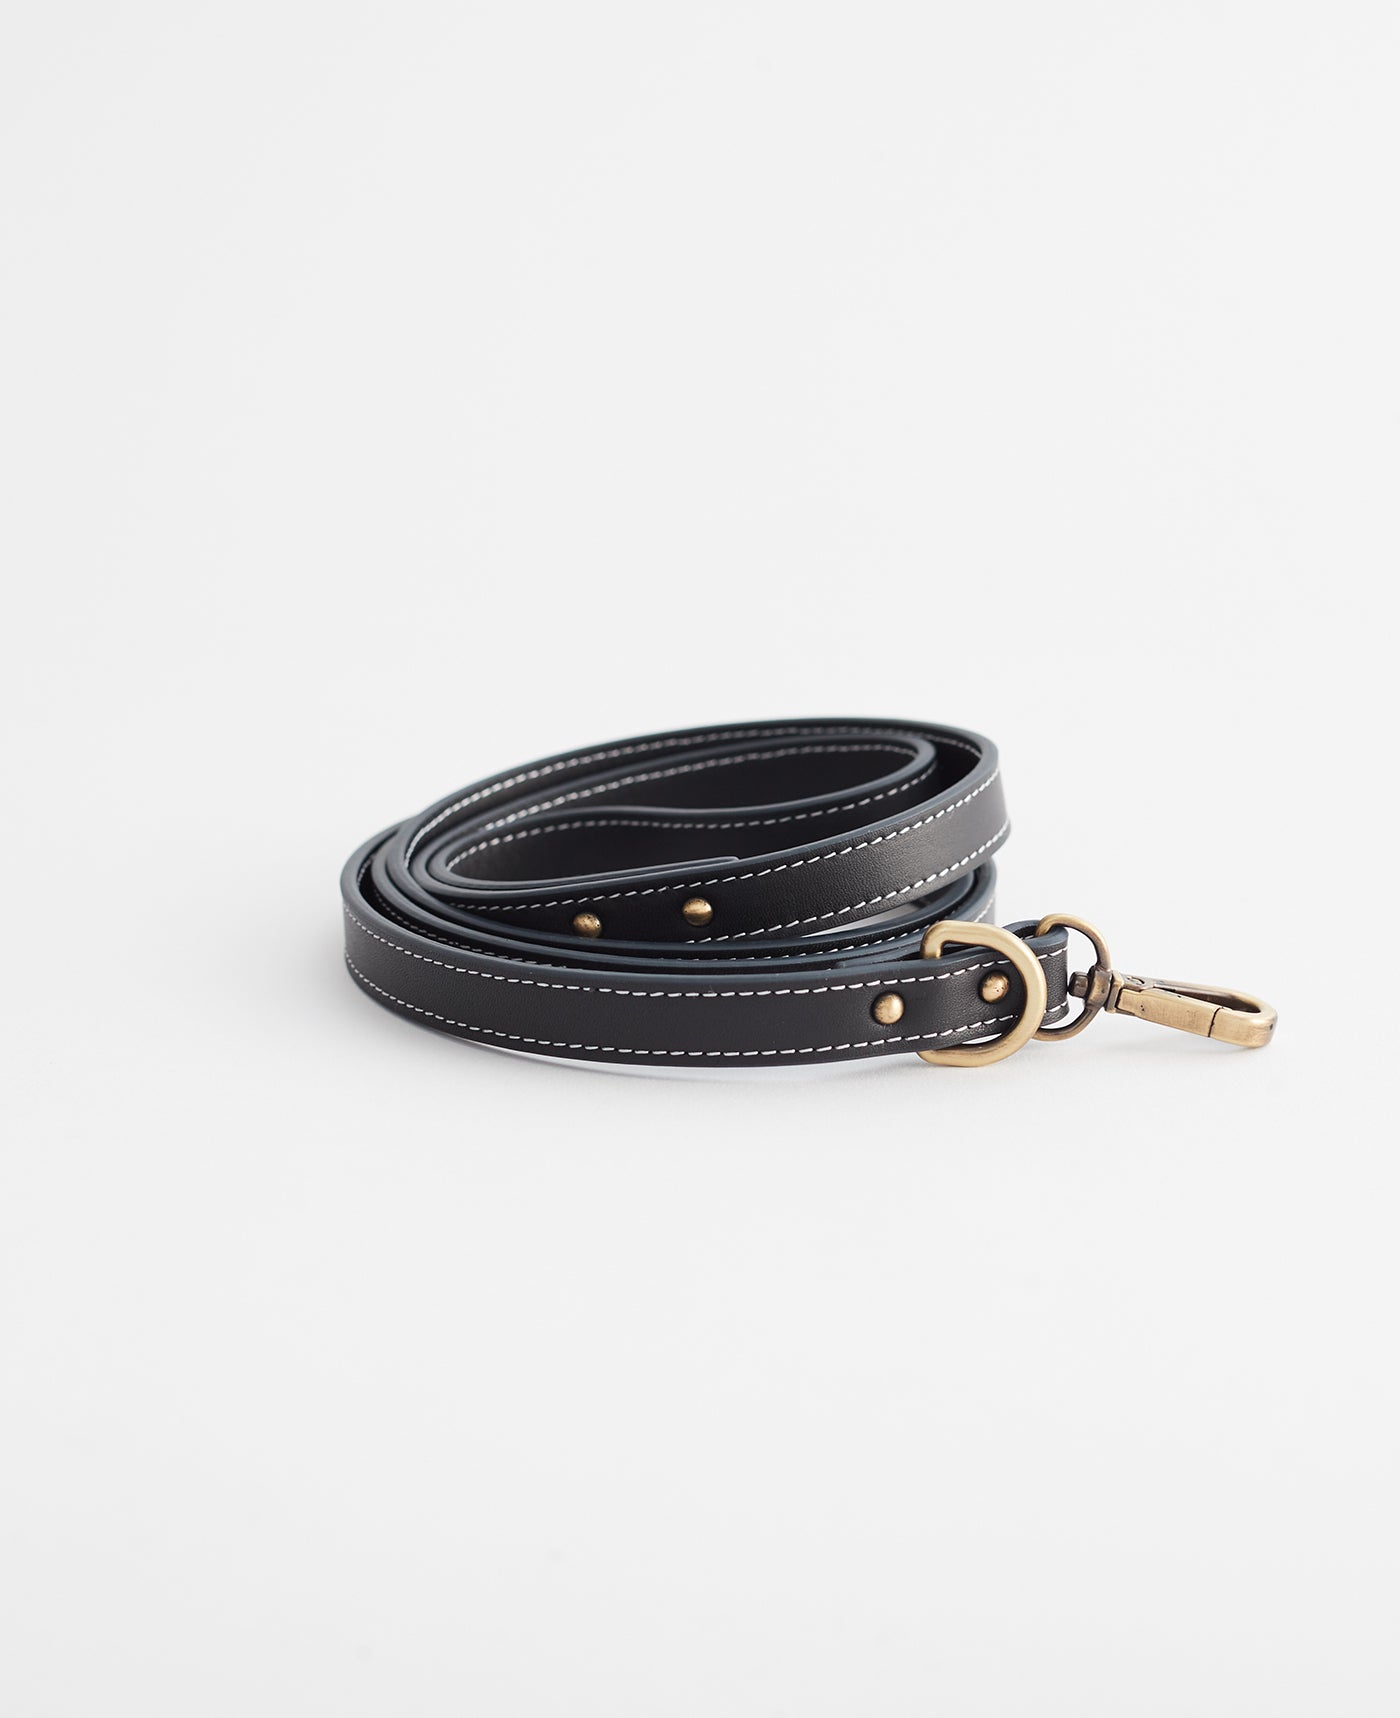 Leather Dog Lead/Leash in Black - Size Small by The Horse®